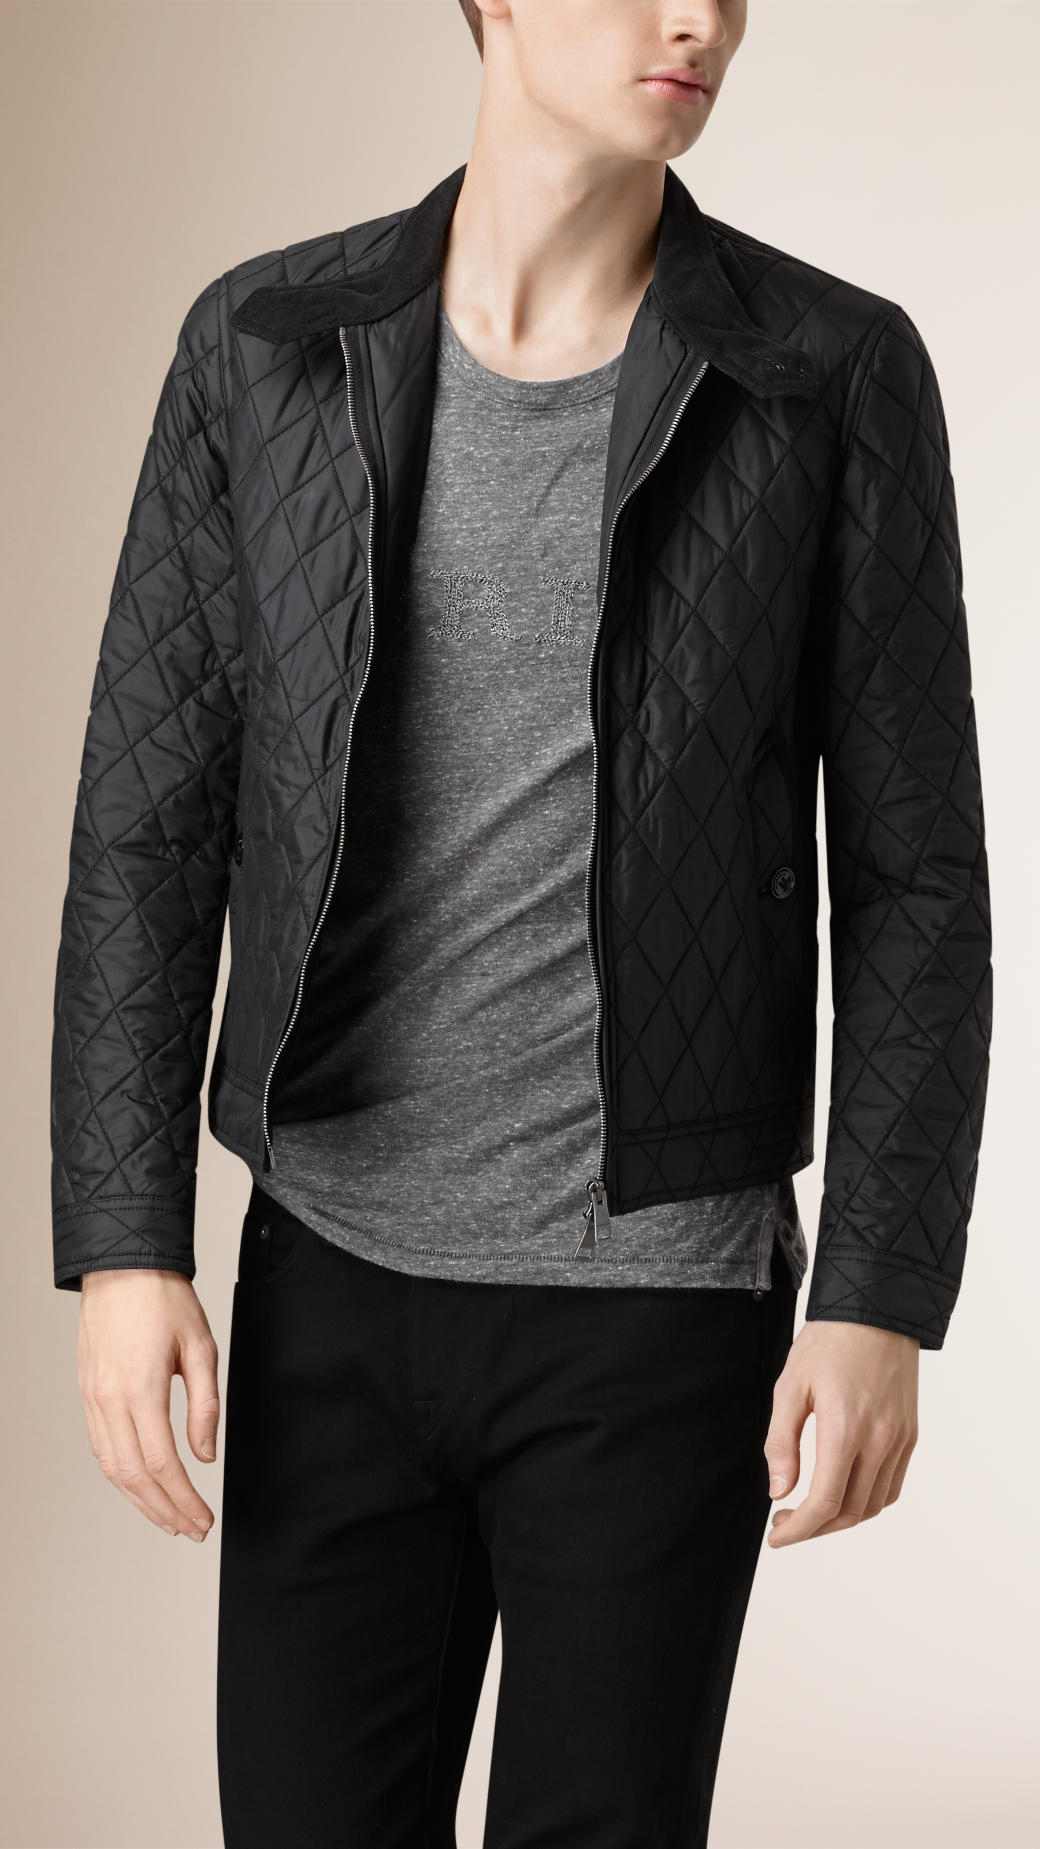 Burberry Diamond Quilted Harrington Jacket in Black for Men - Lyst